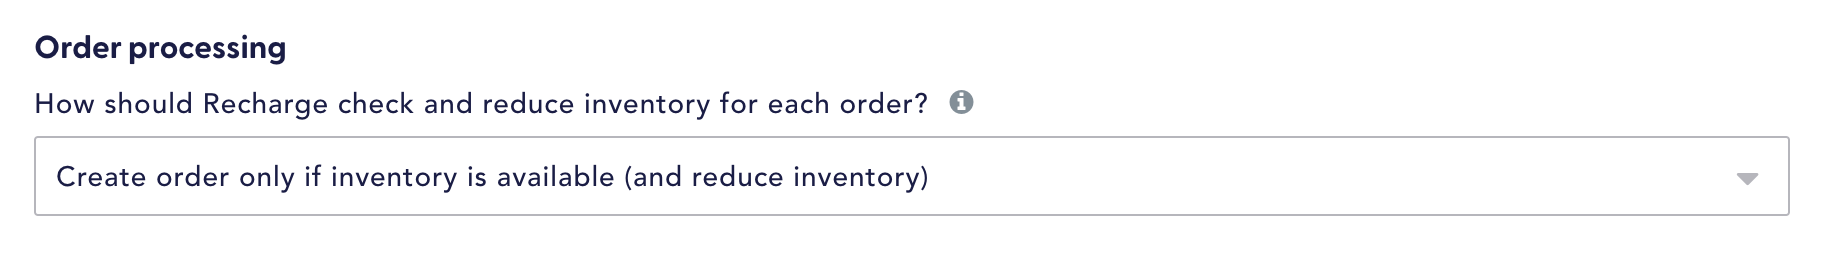 Order_processing_inventory_settings_in_the_Recharge_Dashboard.png